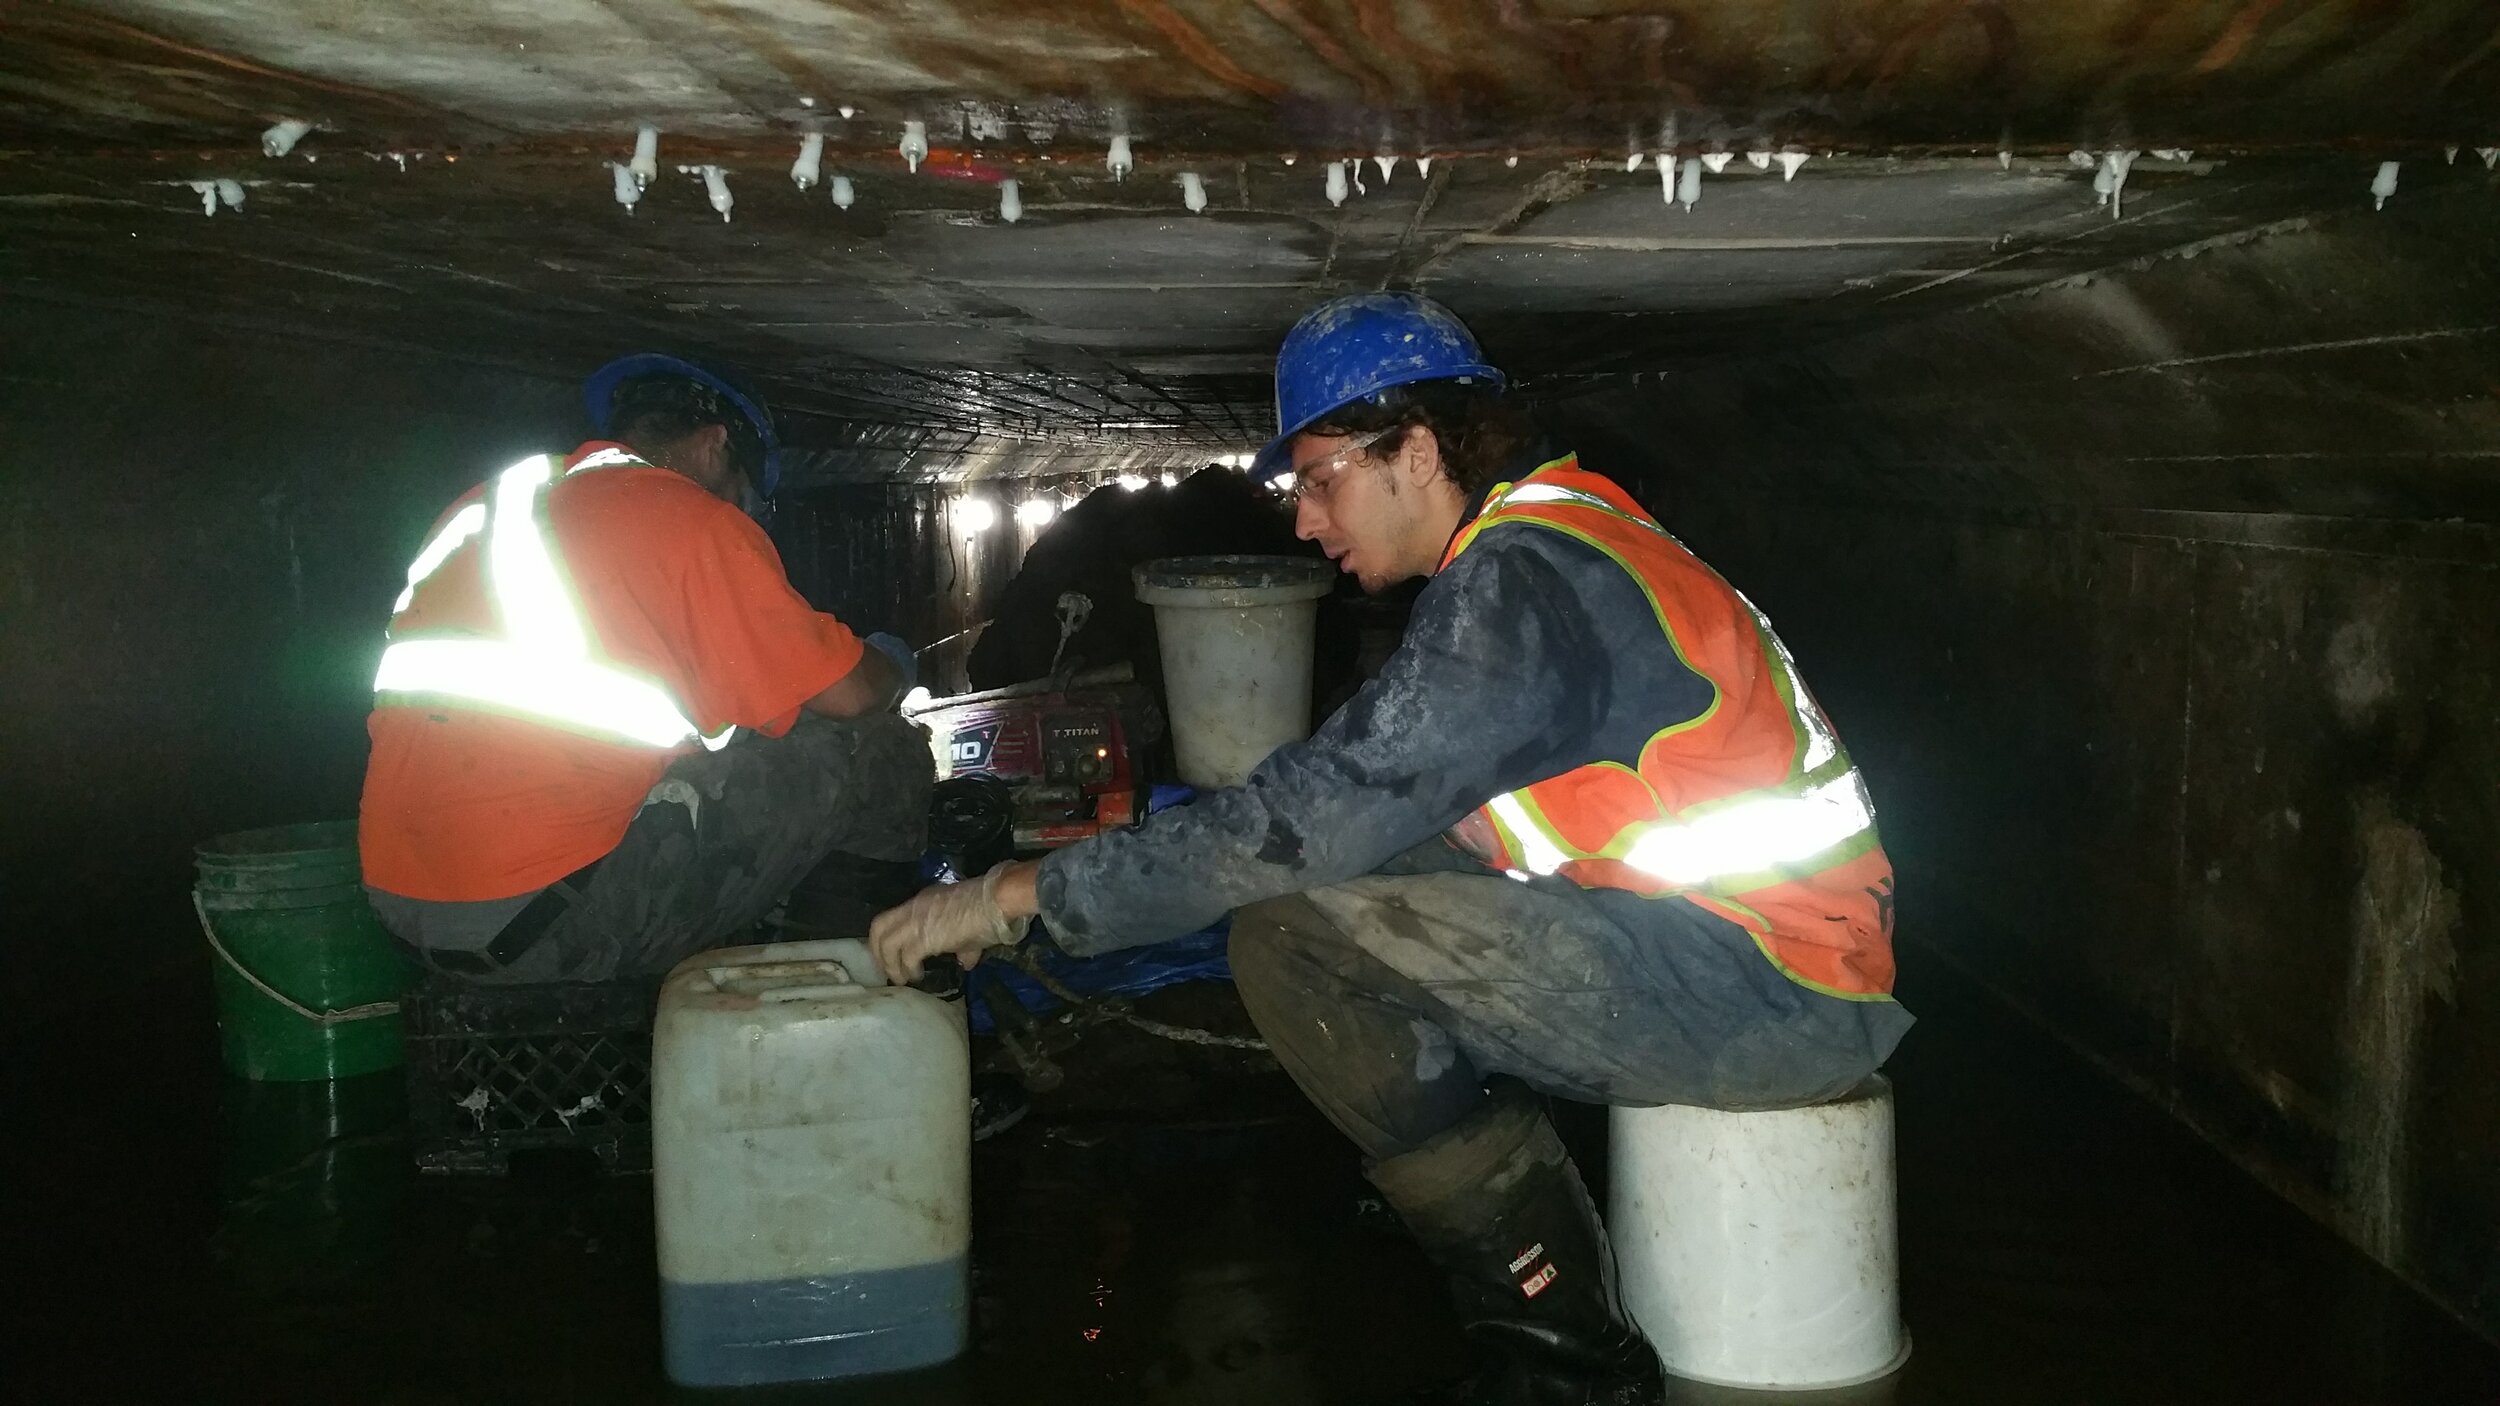 MTO - Concrete repair injection in 401 tunnel 20170921_095502.jpg